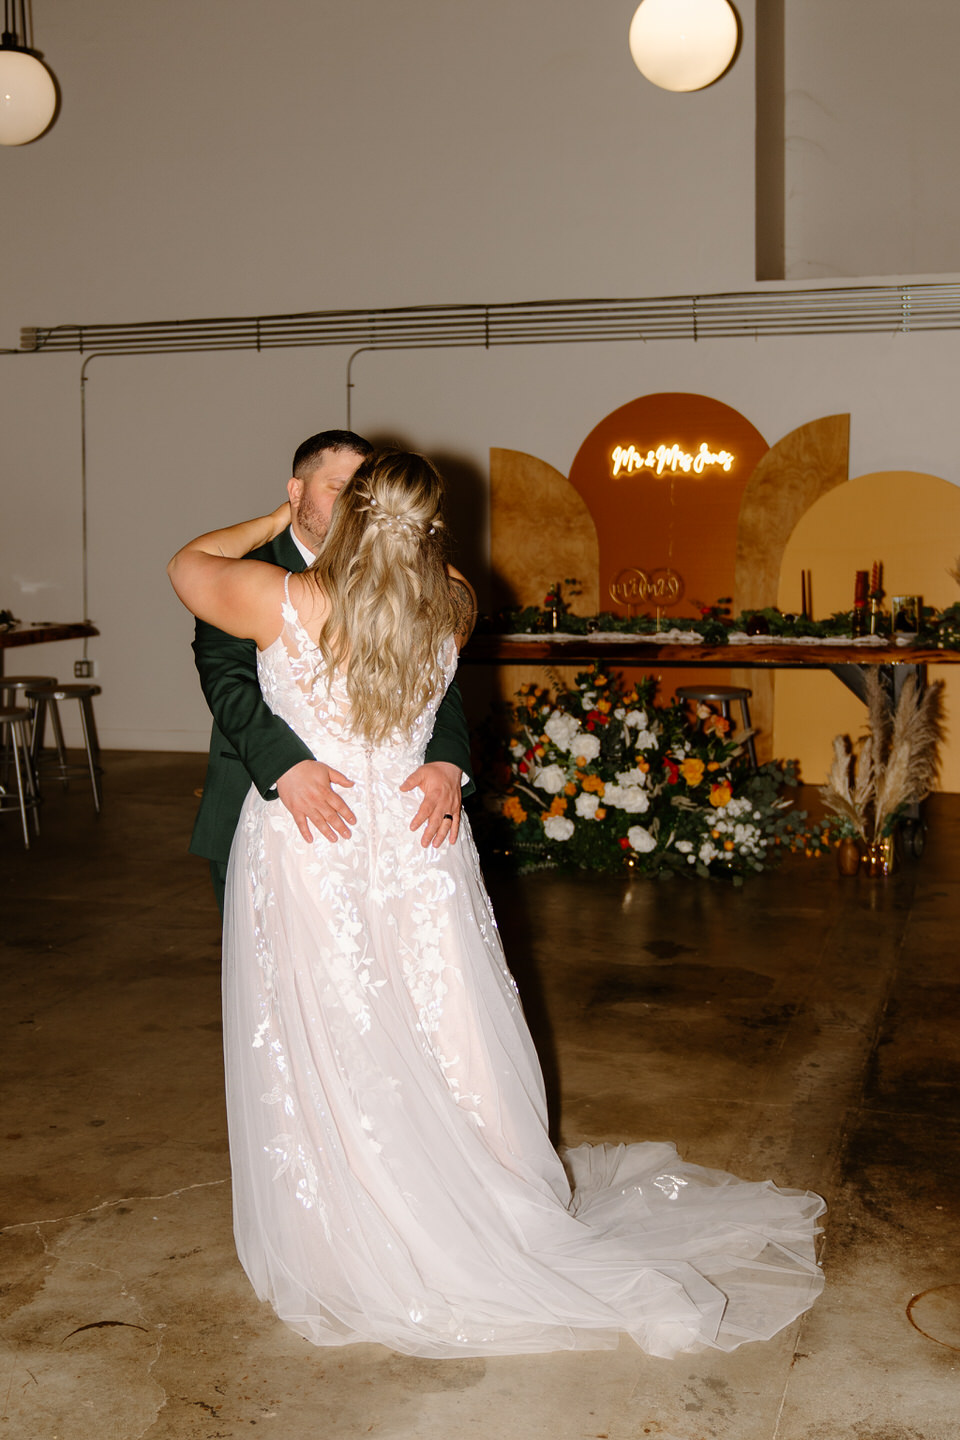 private last dance at greenhouse wedding